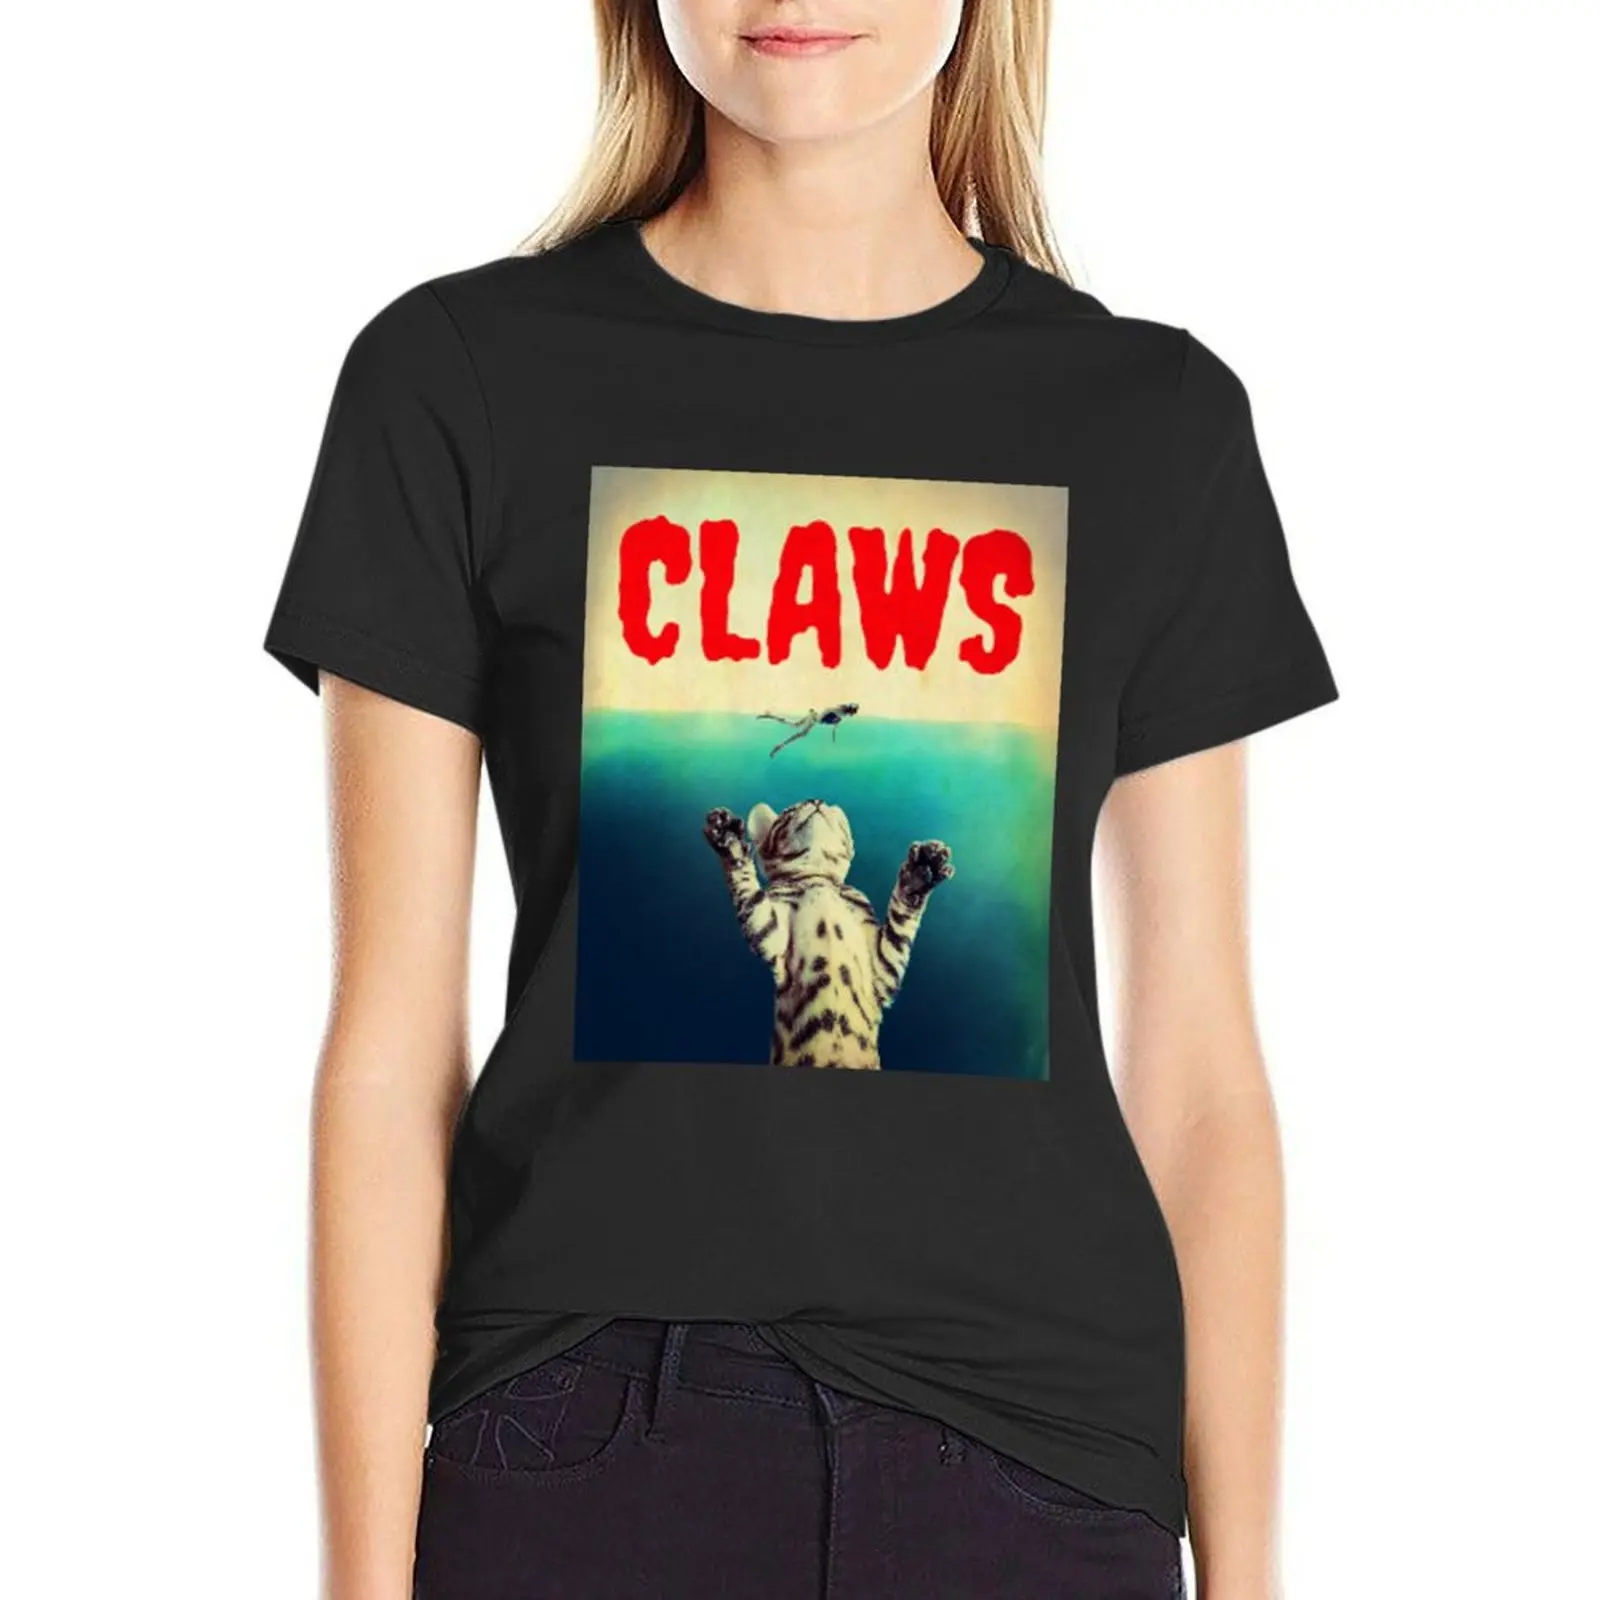 

Claws T-Shirt plus sizes animal print female summer tops womans clothing